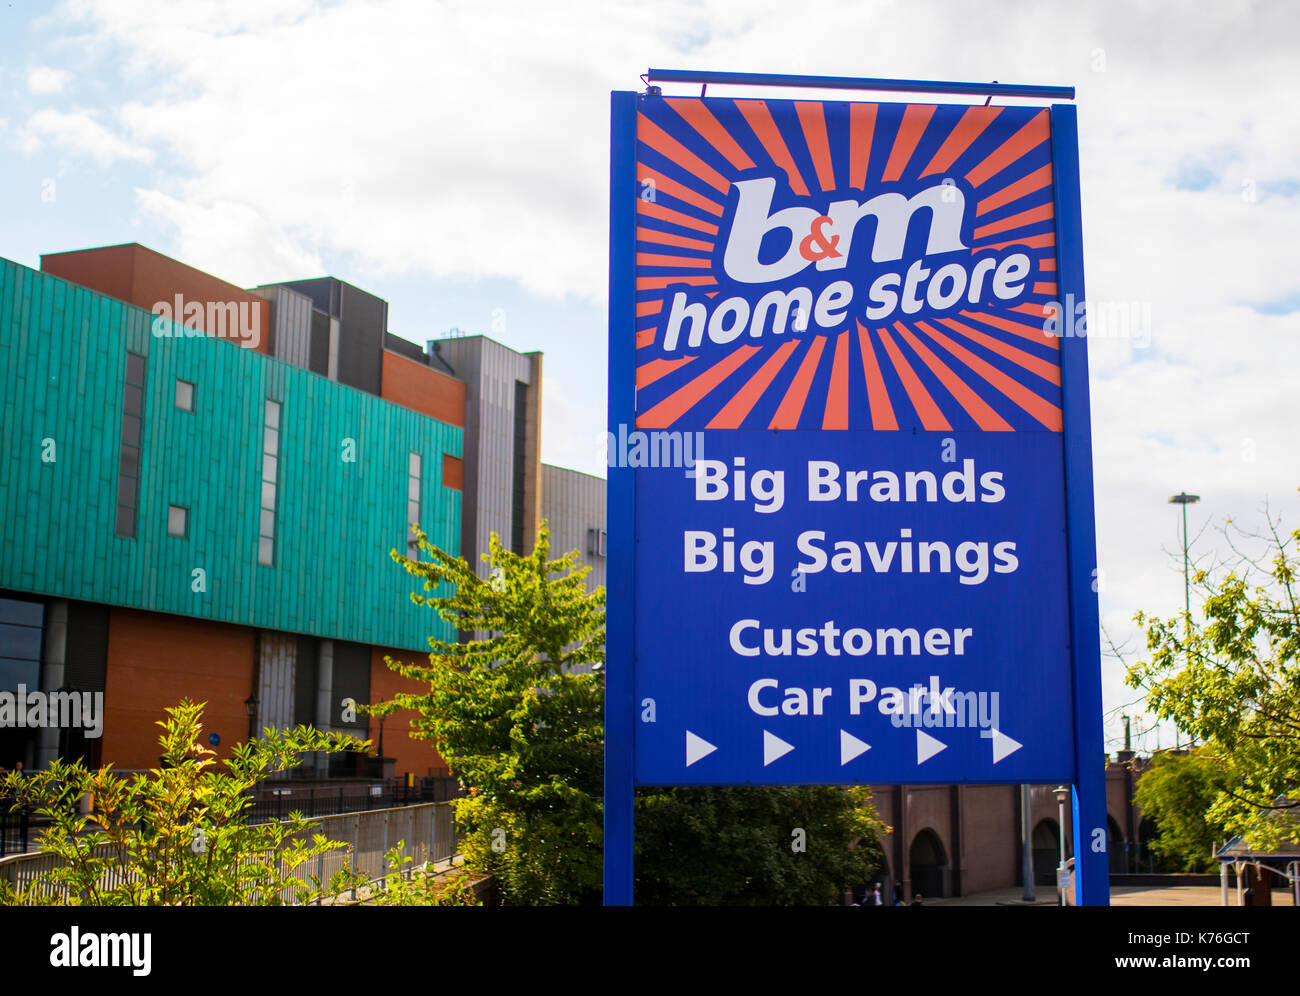 B&M Retail Ltd home bargains monolith store sign in Doncaster, England rising up against the sky Stock Photo